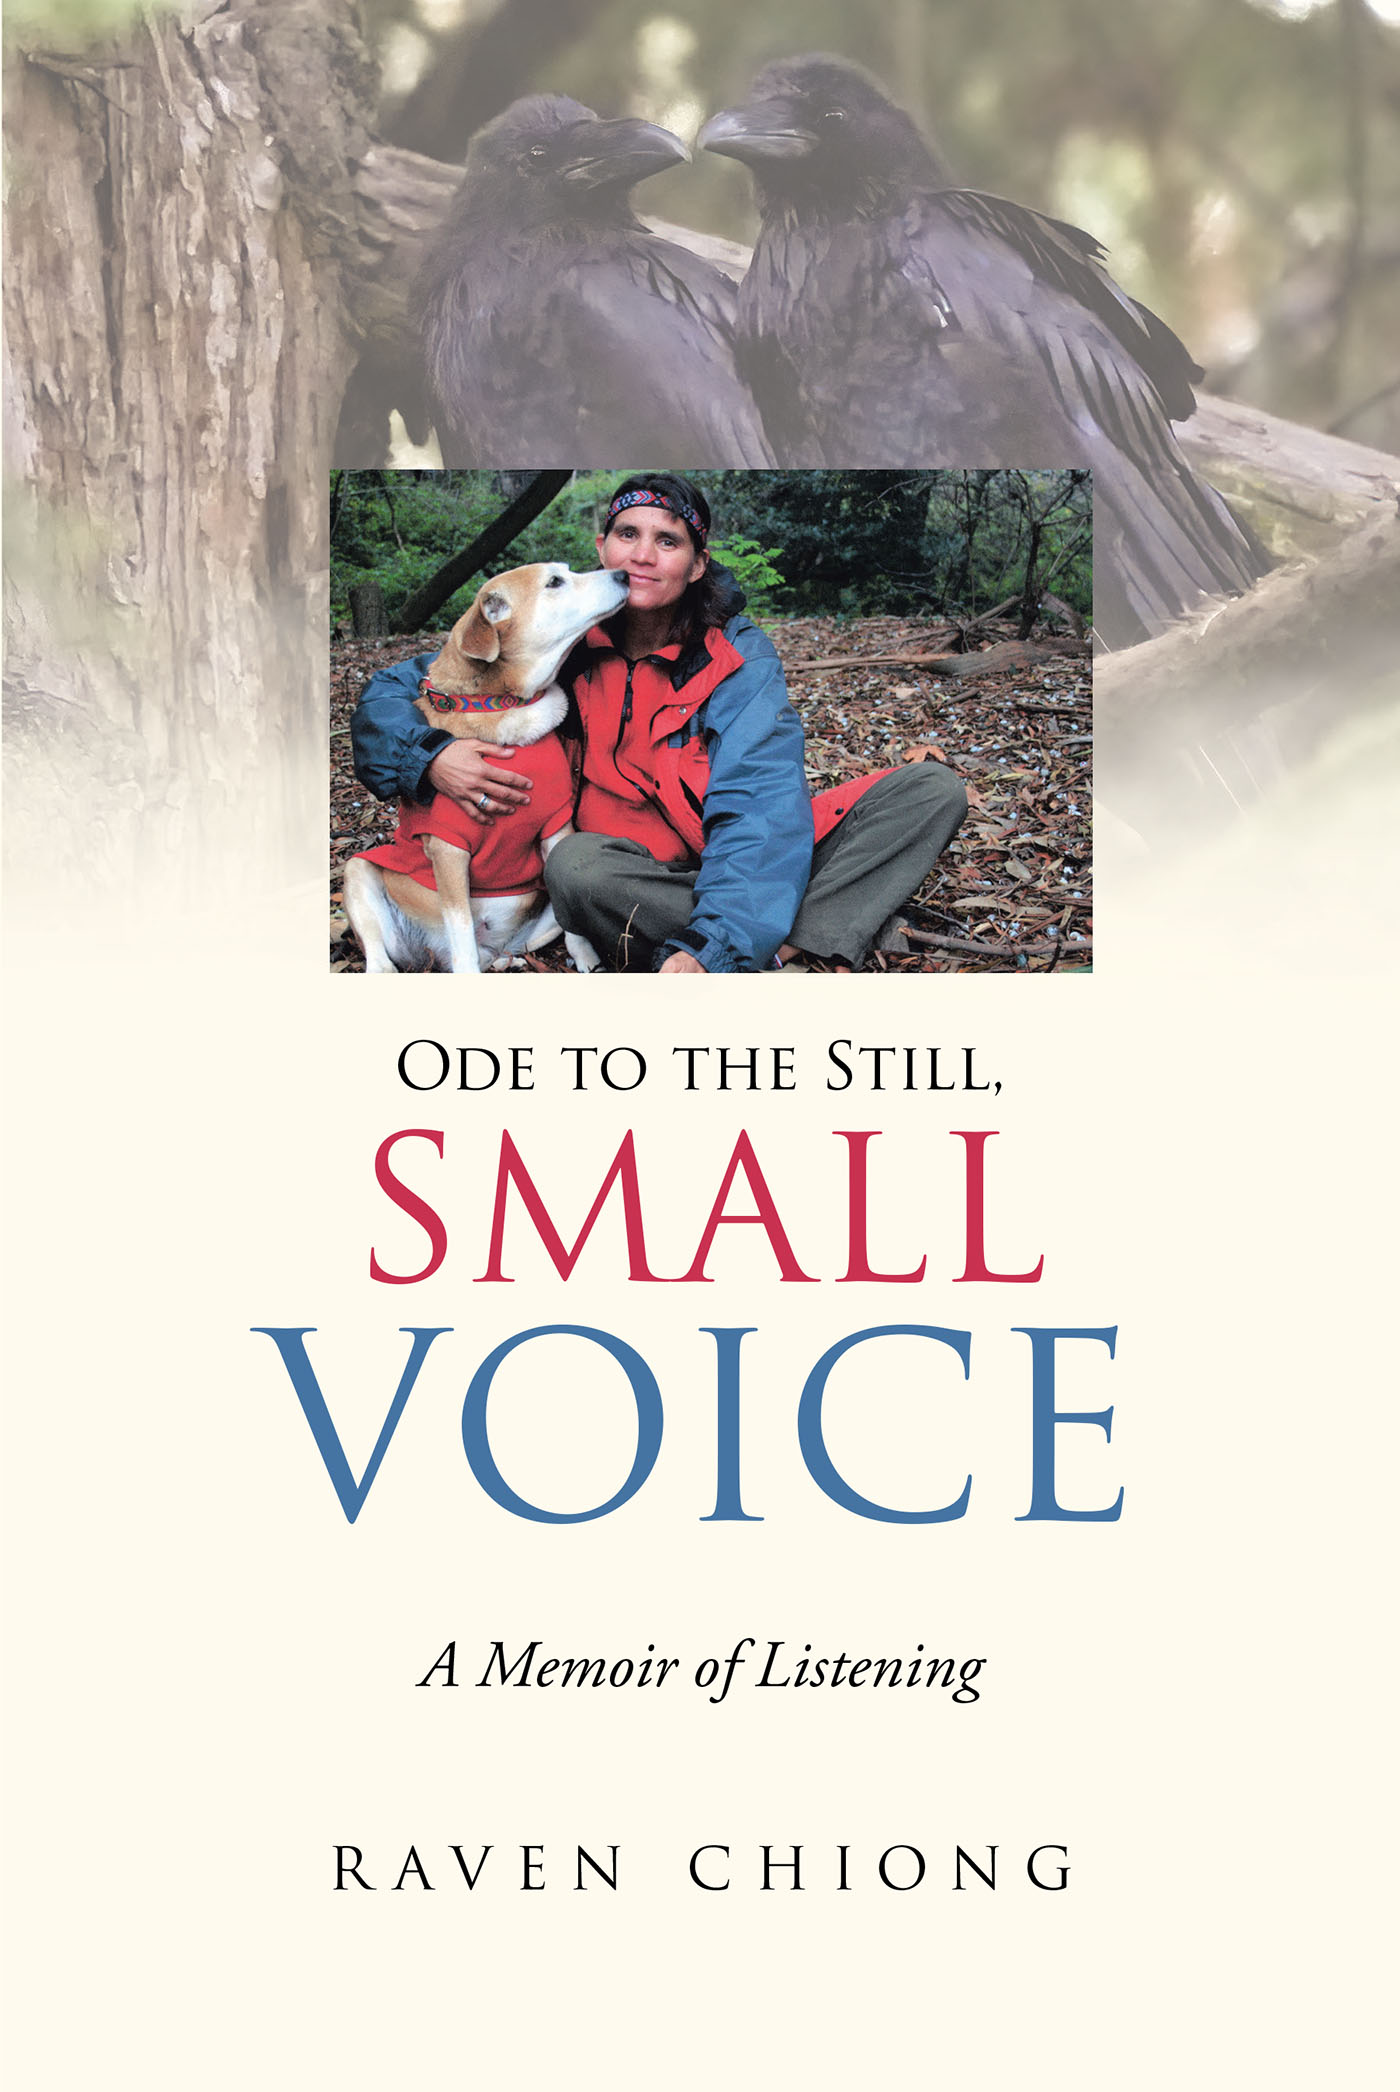 Author Raven Chiong’s New Book, "Ode to the Still, Small Voice: A Memoir of Listening," is a Collection of Poems Crafted to Help Readers Discover Hope, Humor, and Healing